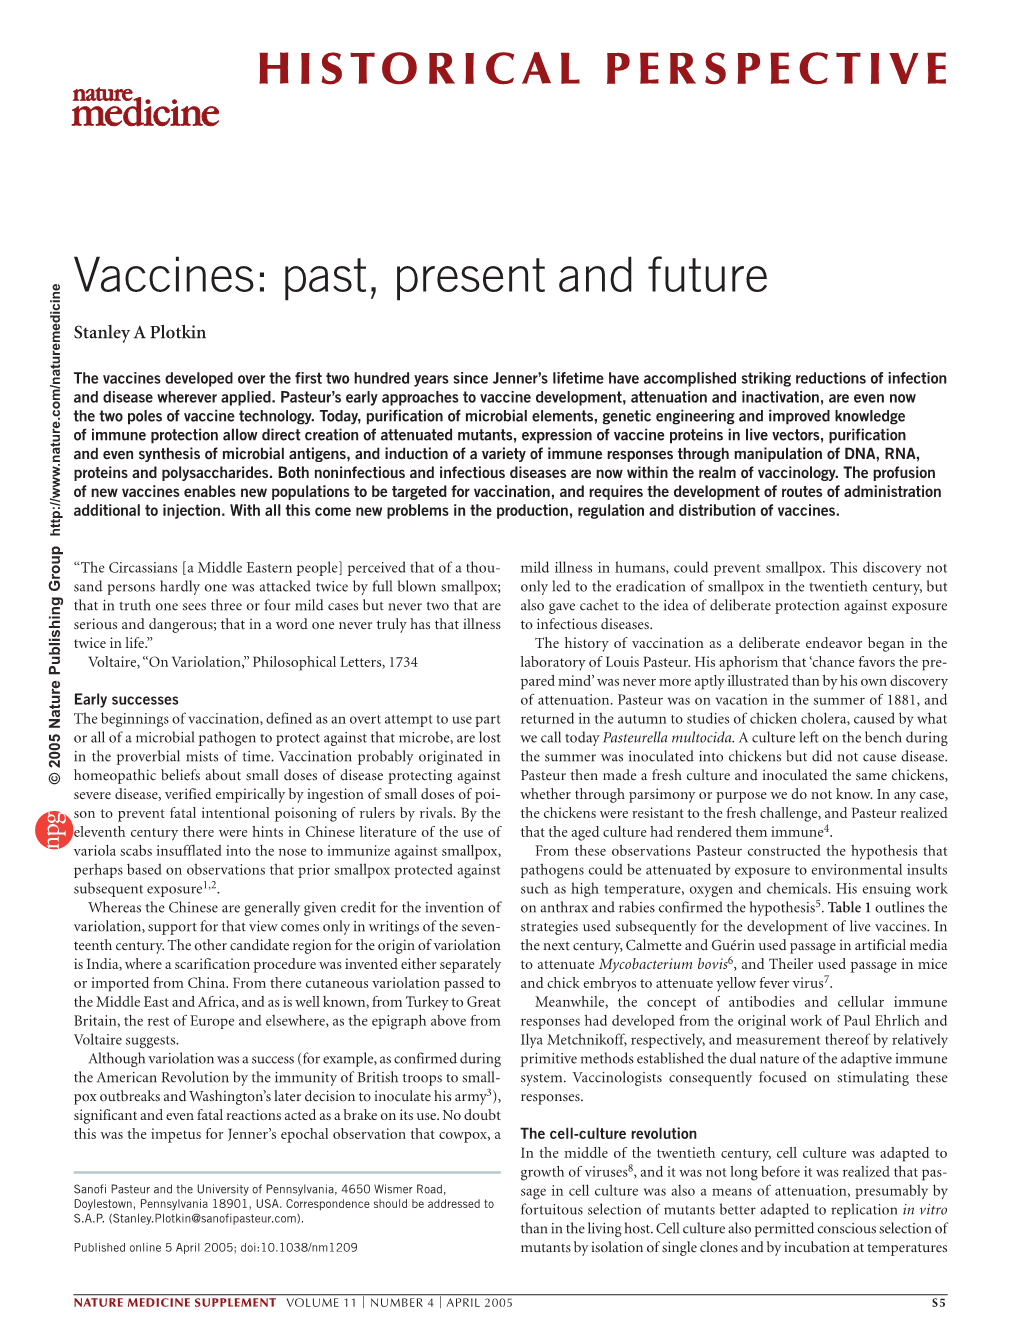 Vaccines: Past, Present and Future